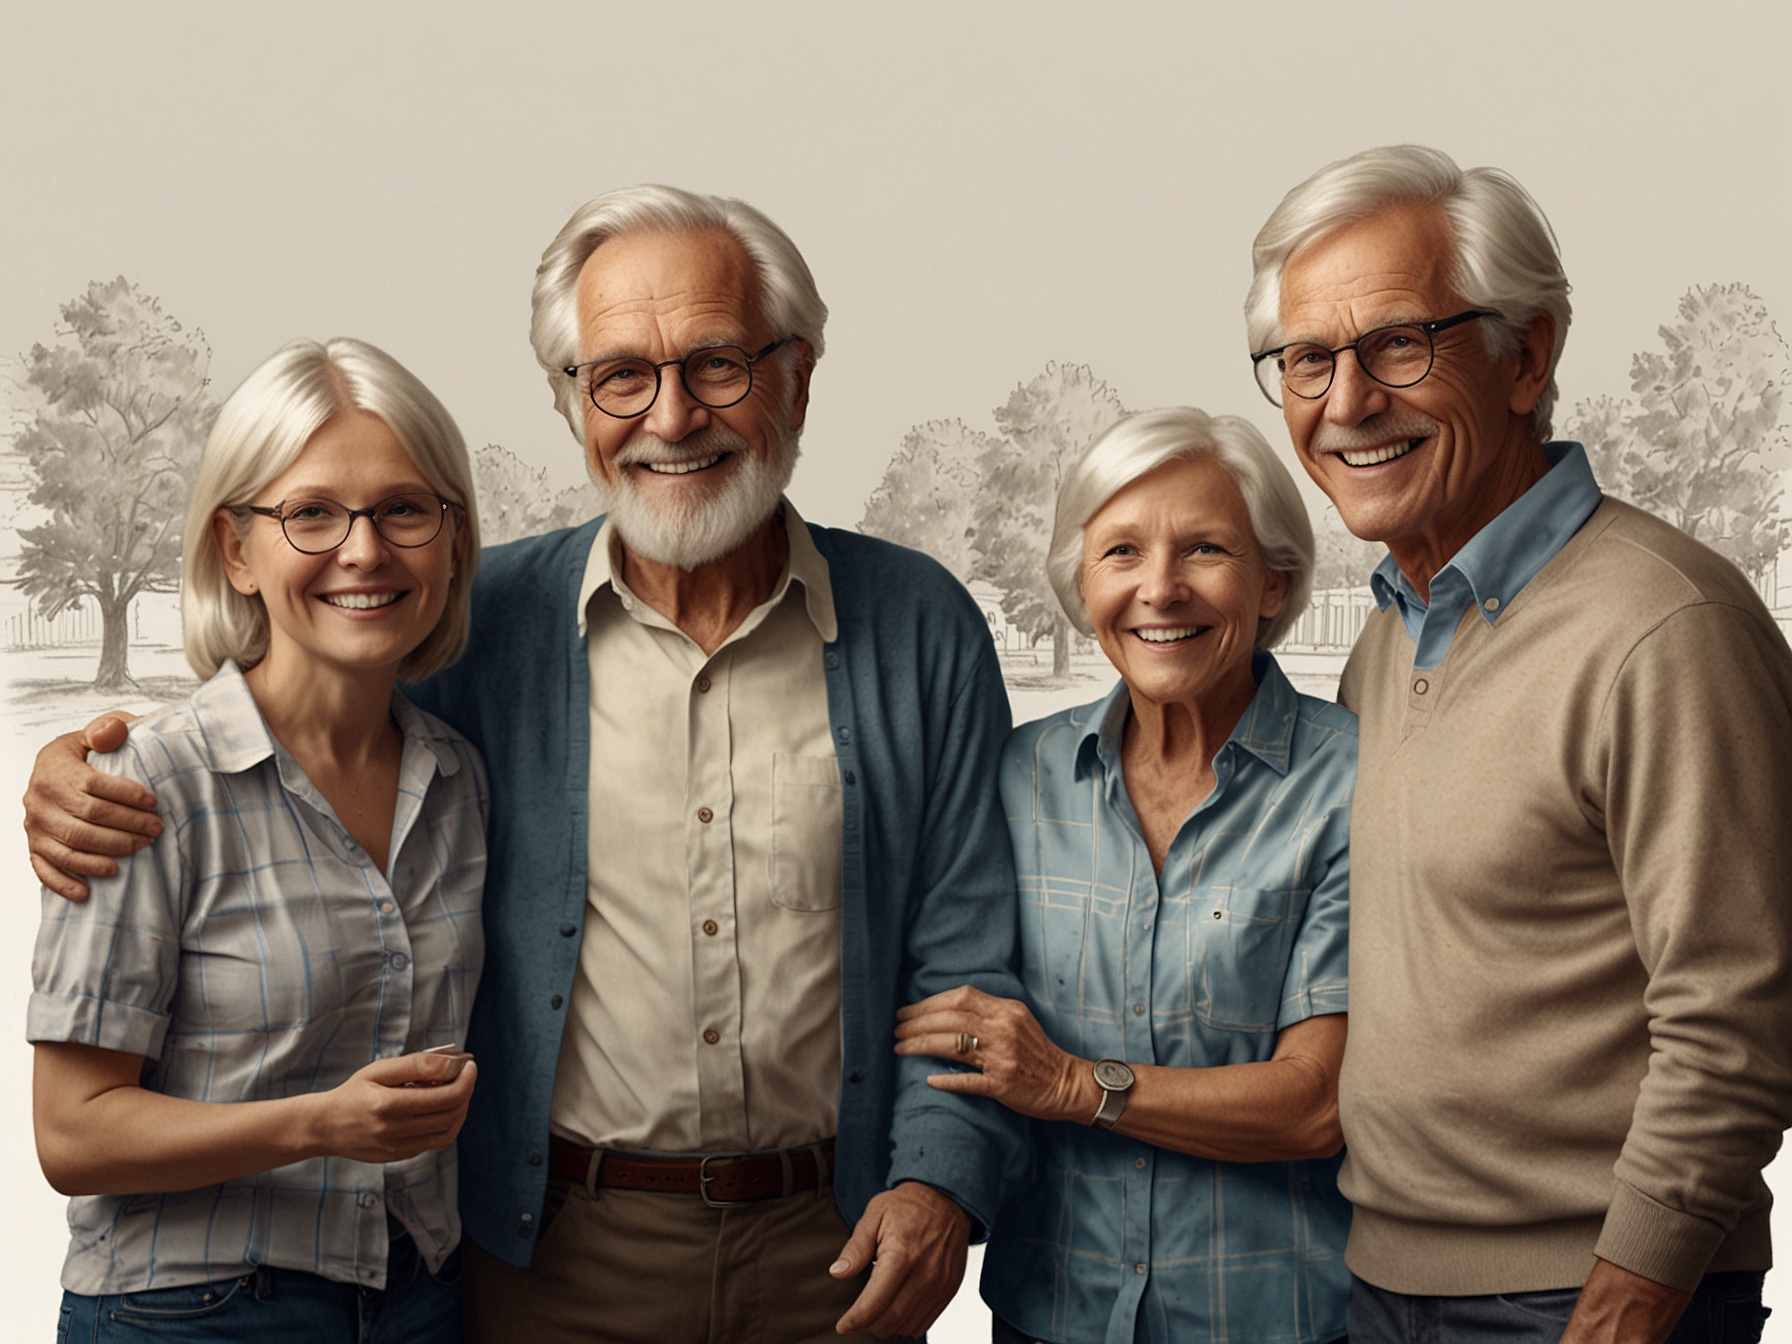 A happy Swedish family showcasing multiple generations, including grandparents actively engaging with their grandchildren, symbolizing the bond strengthened through the new law.